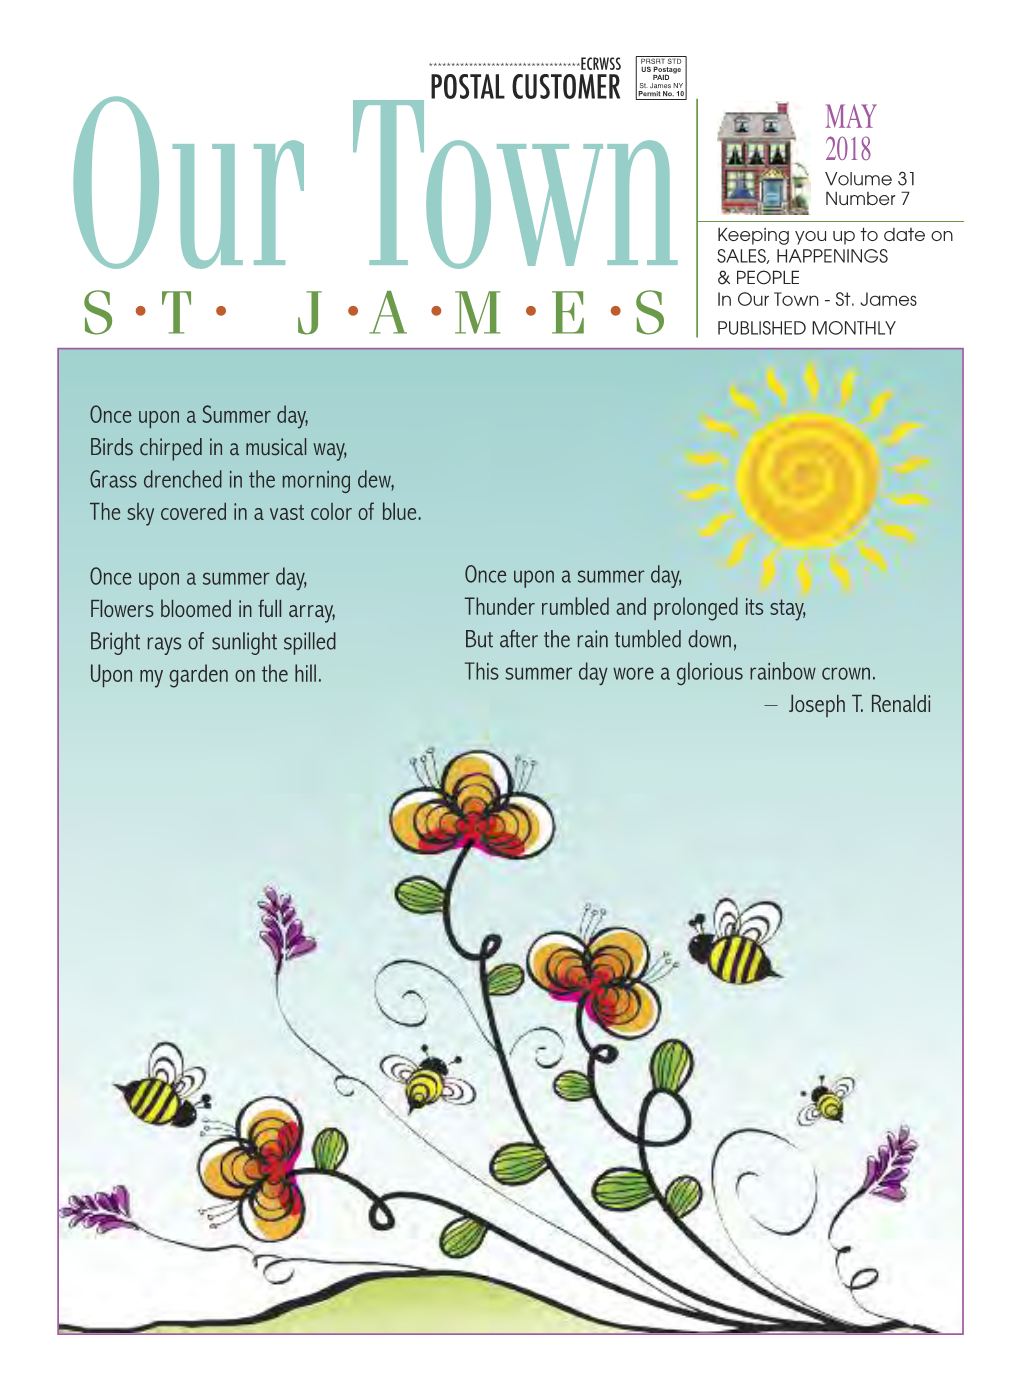 MAY 2018 Volume 31 Number 7 Keeping You up to Date on SALES, HAPPENINGS Our Town & PEOPLE • • • • • • in Our Town - St